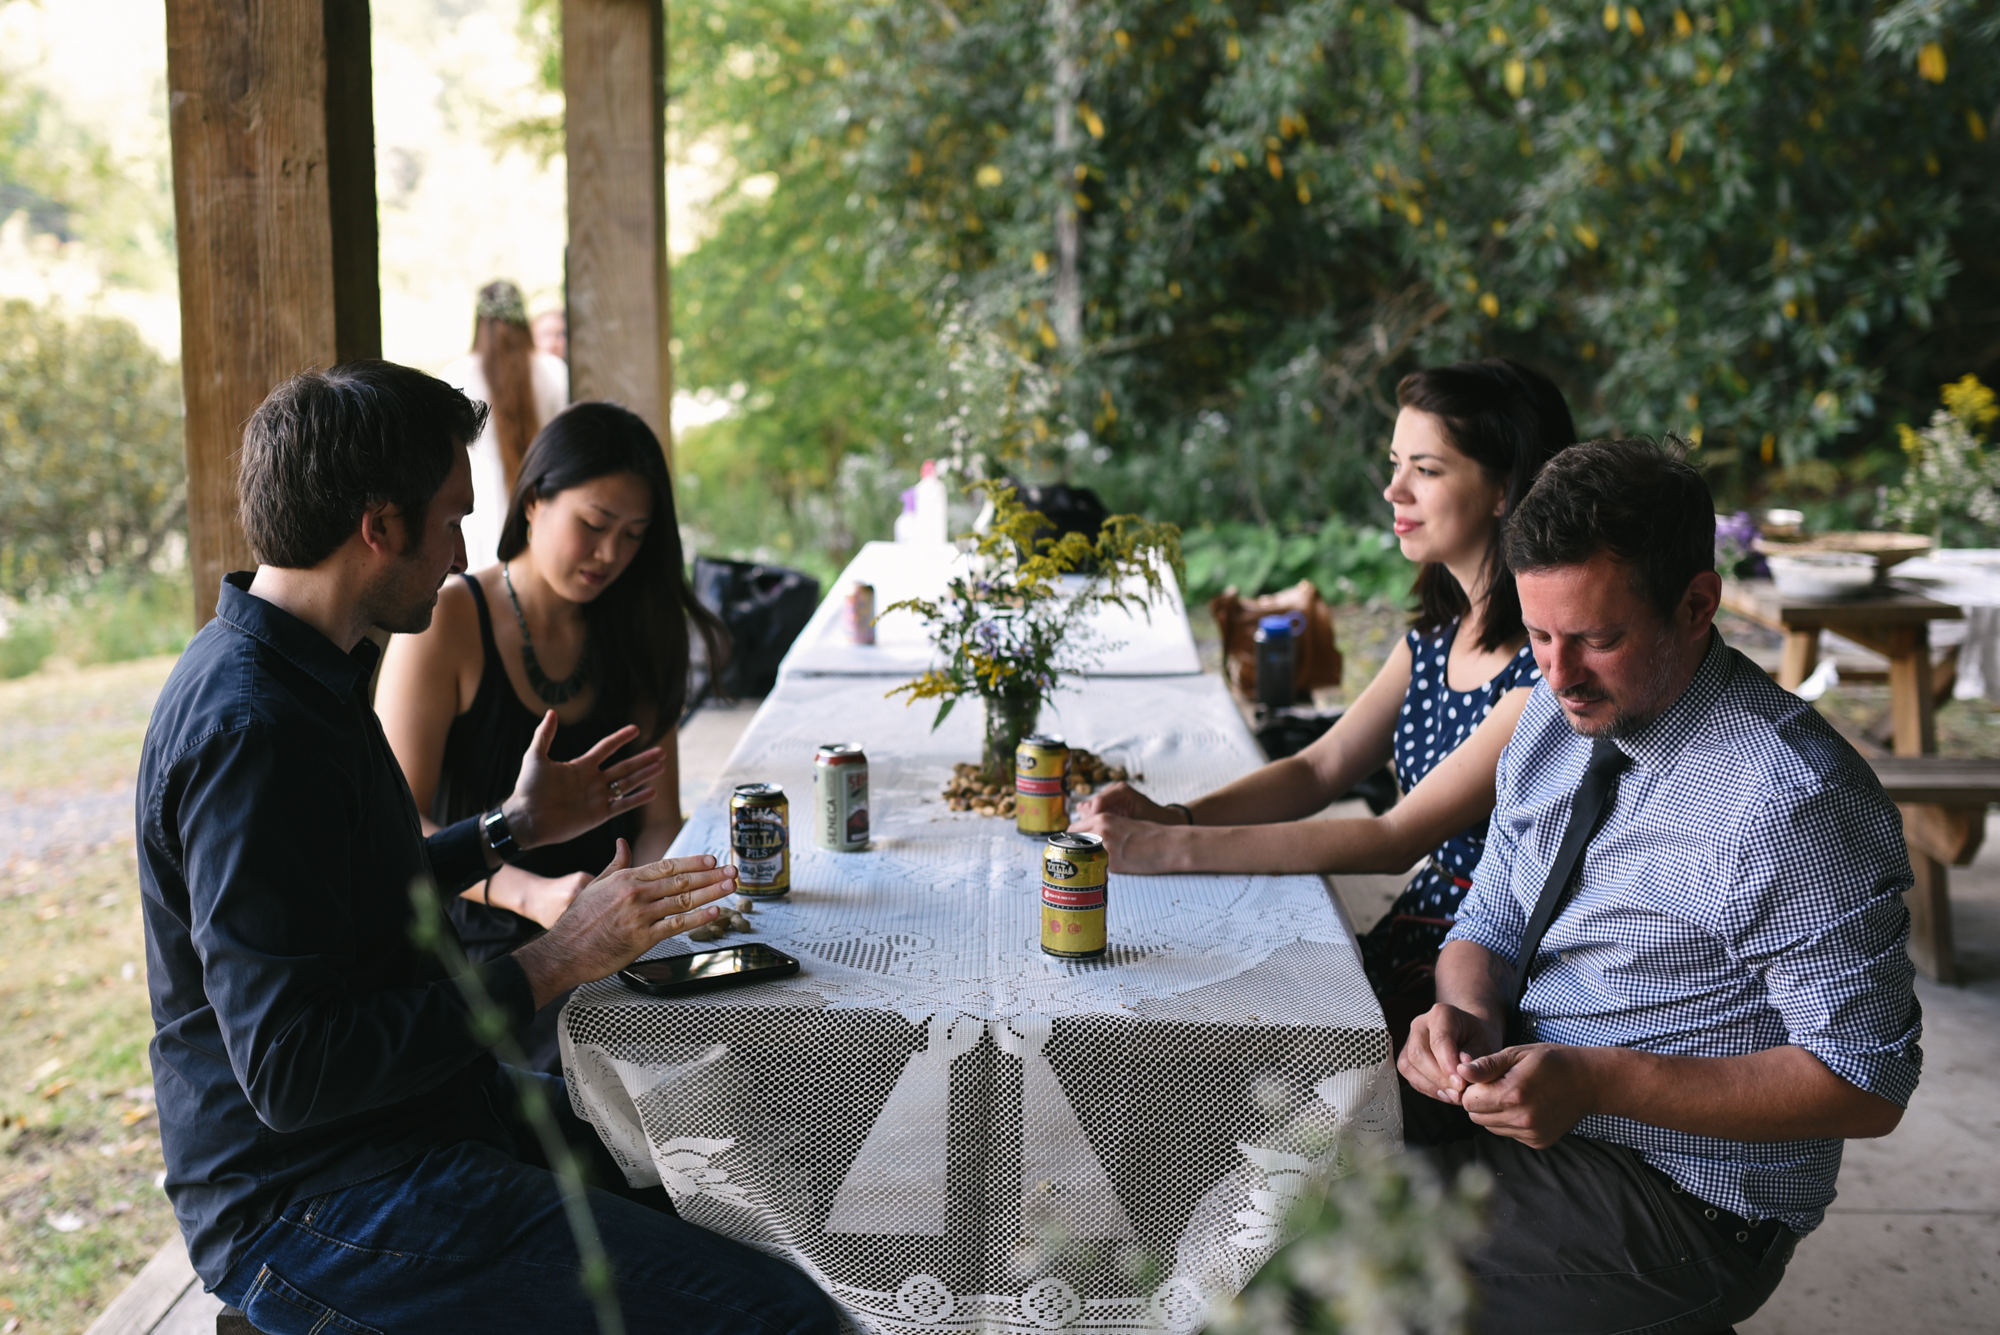  Mountain Wedding, Outdoors, Rustic, West Virginia, Maryland Wedding Photographer, DIY, Casual, Guests chatting at picnic table, wildflowers 